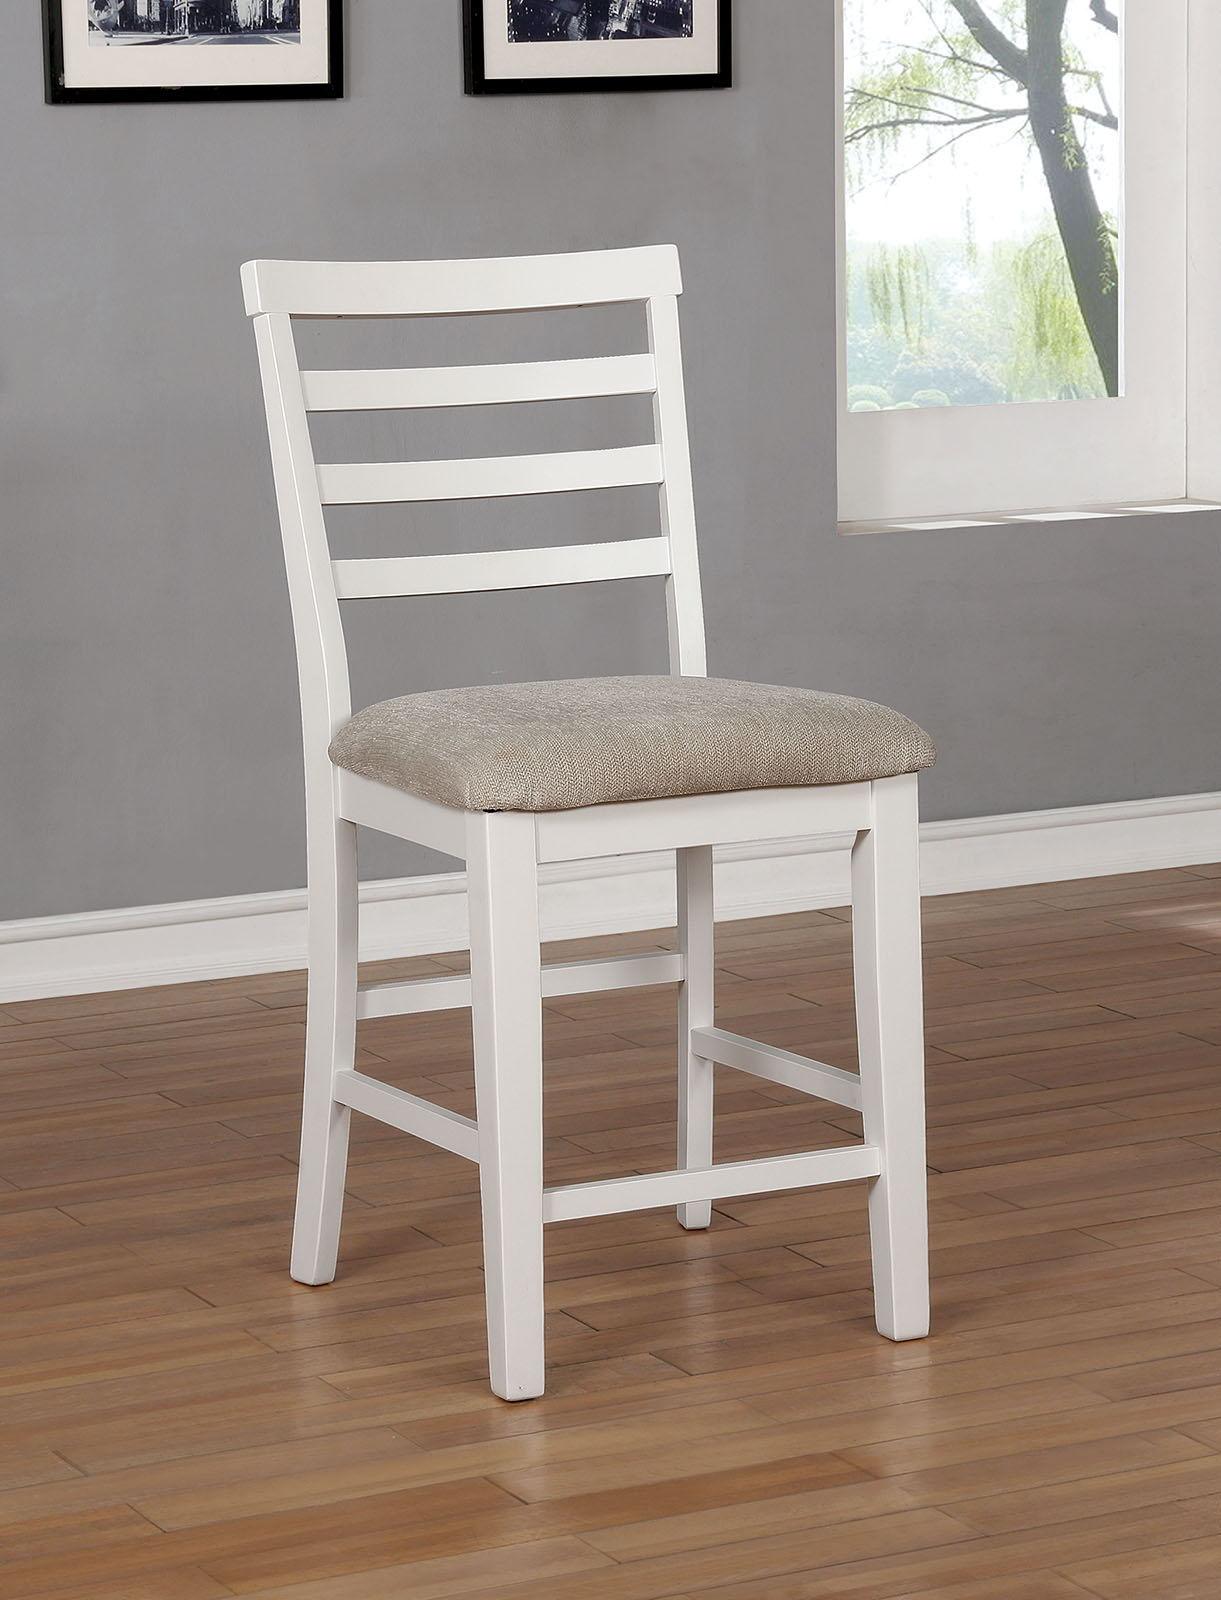 Furniture of America - Kiana - Counter Height Side Chair (Set of 2) - White - 5th Avenue Furniture